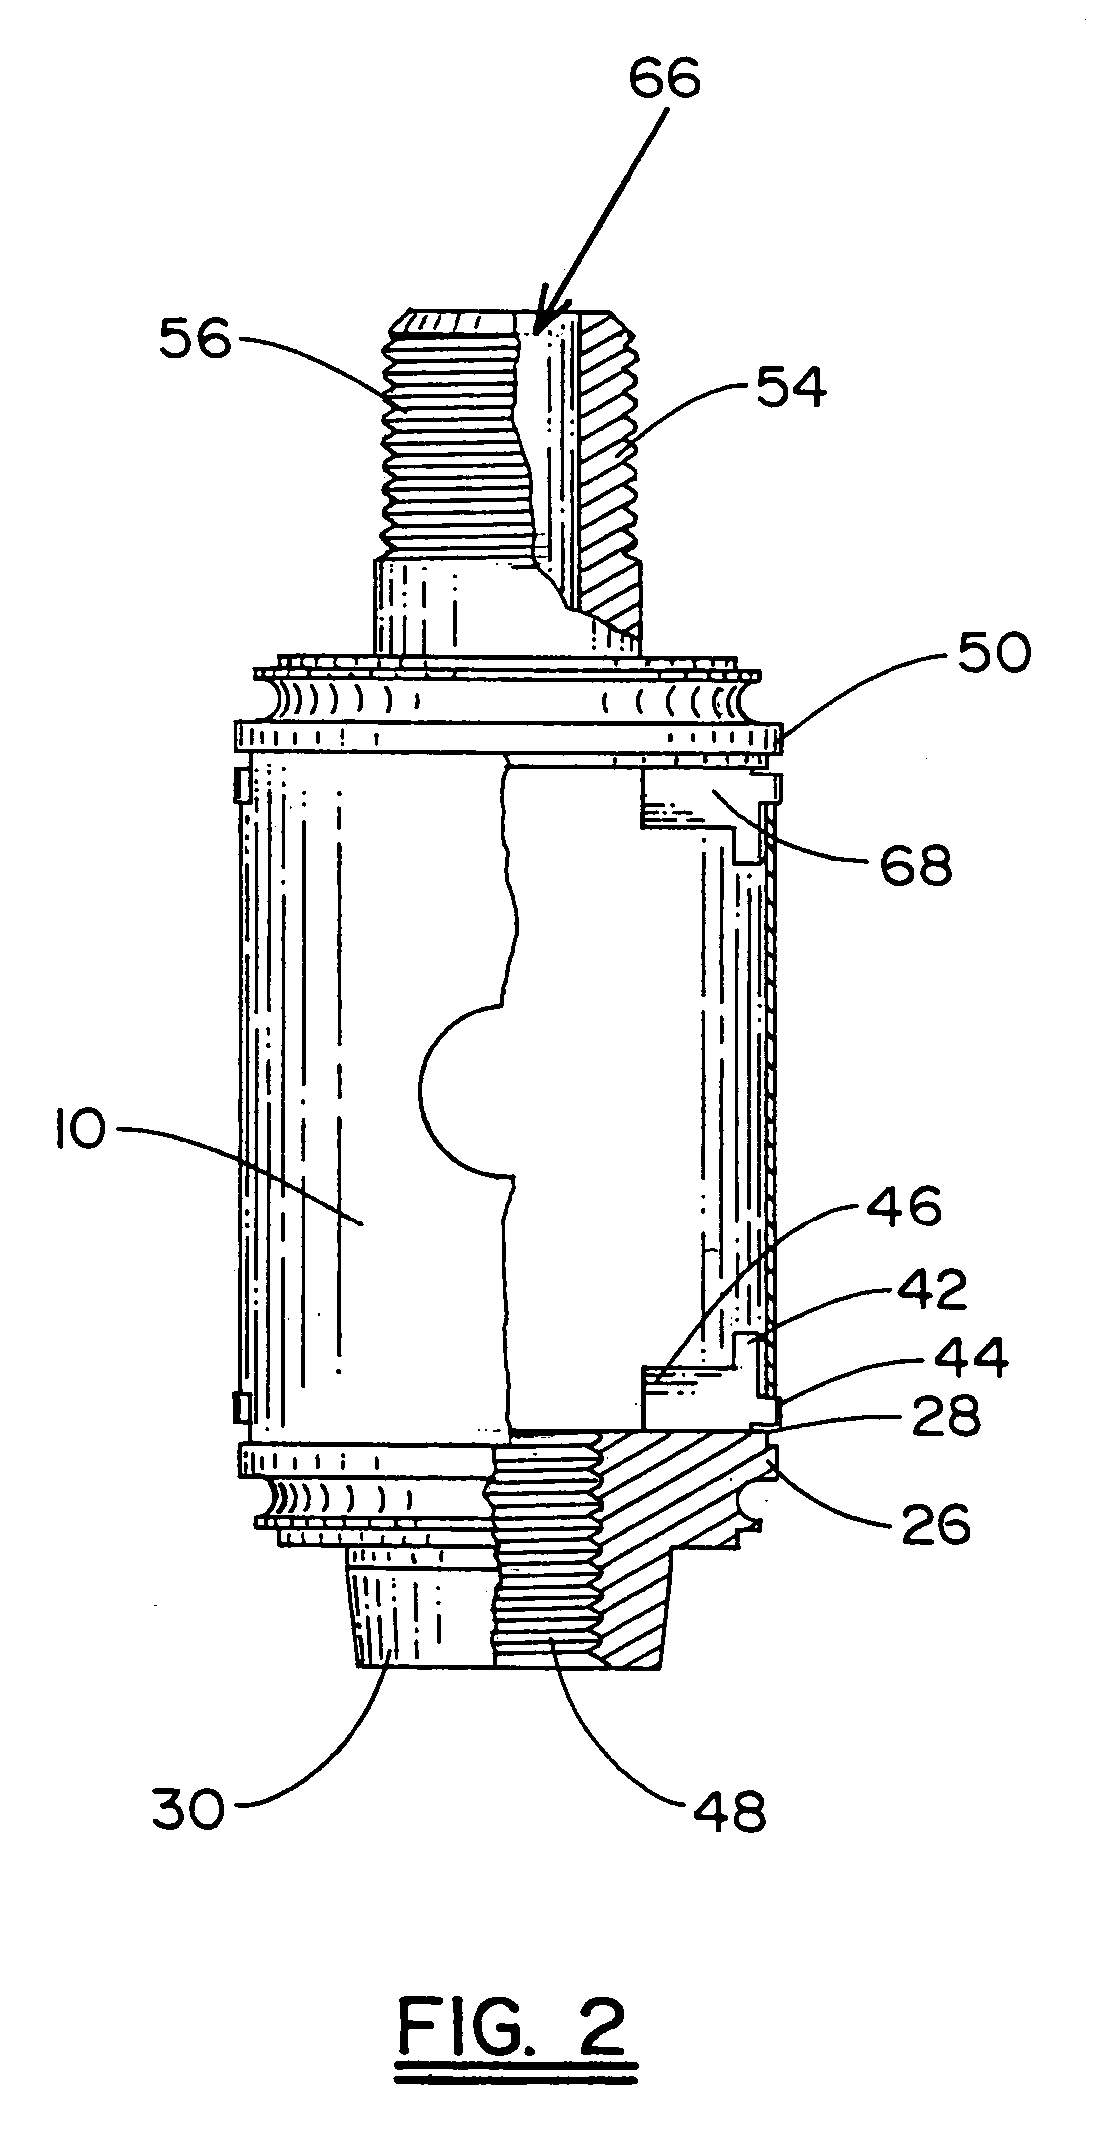 Electronic device enclosure with rotationally locked body and header